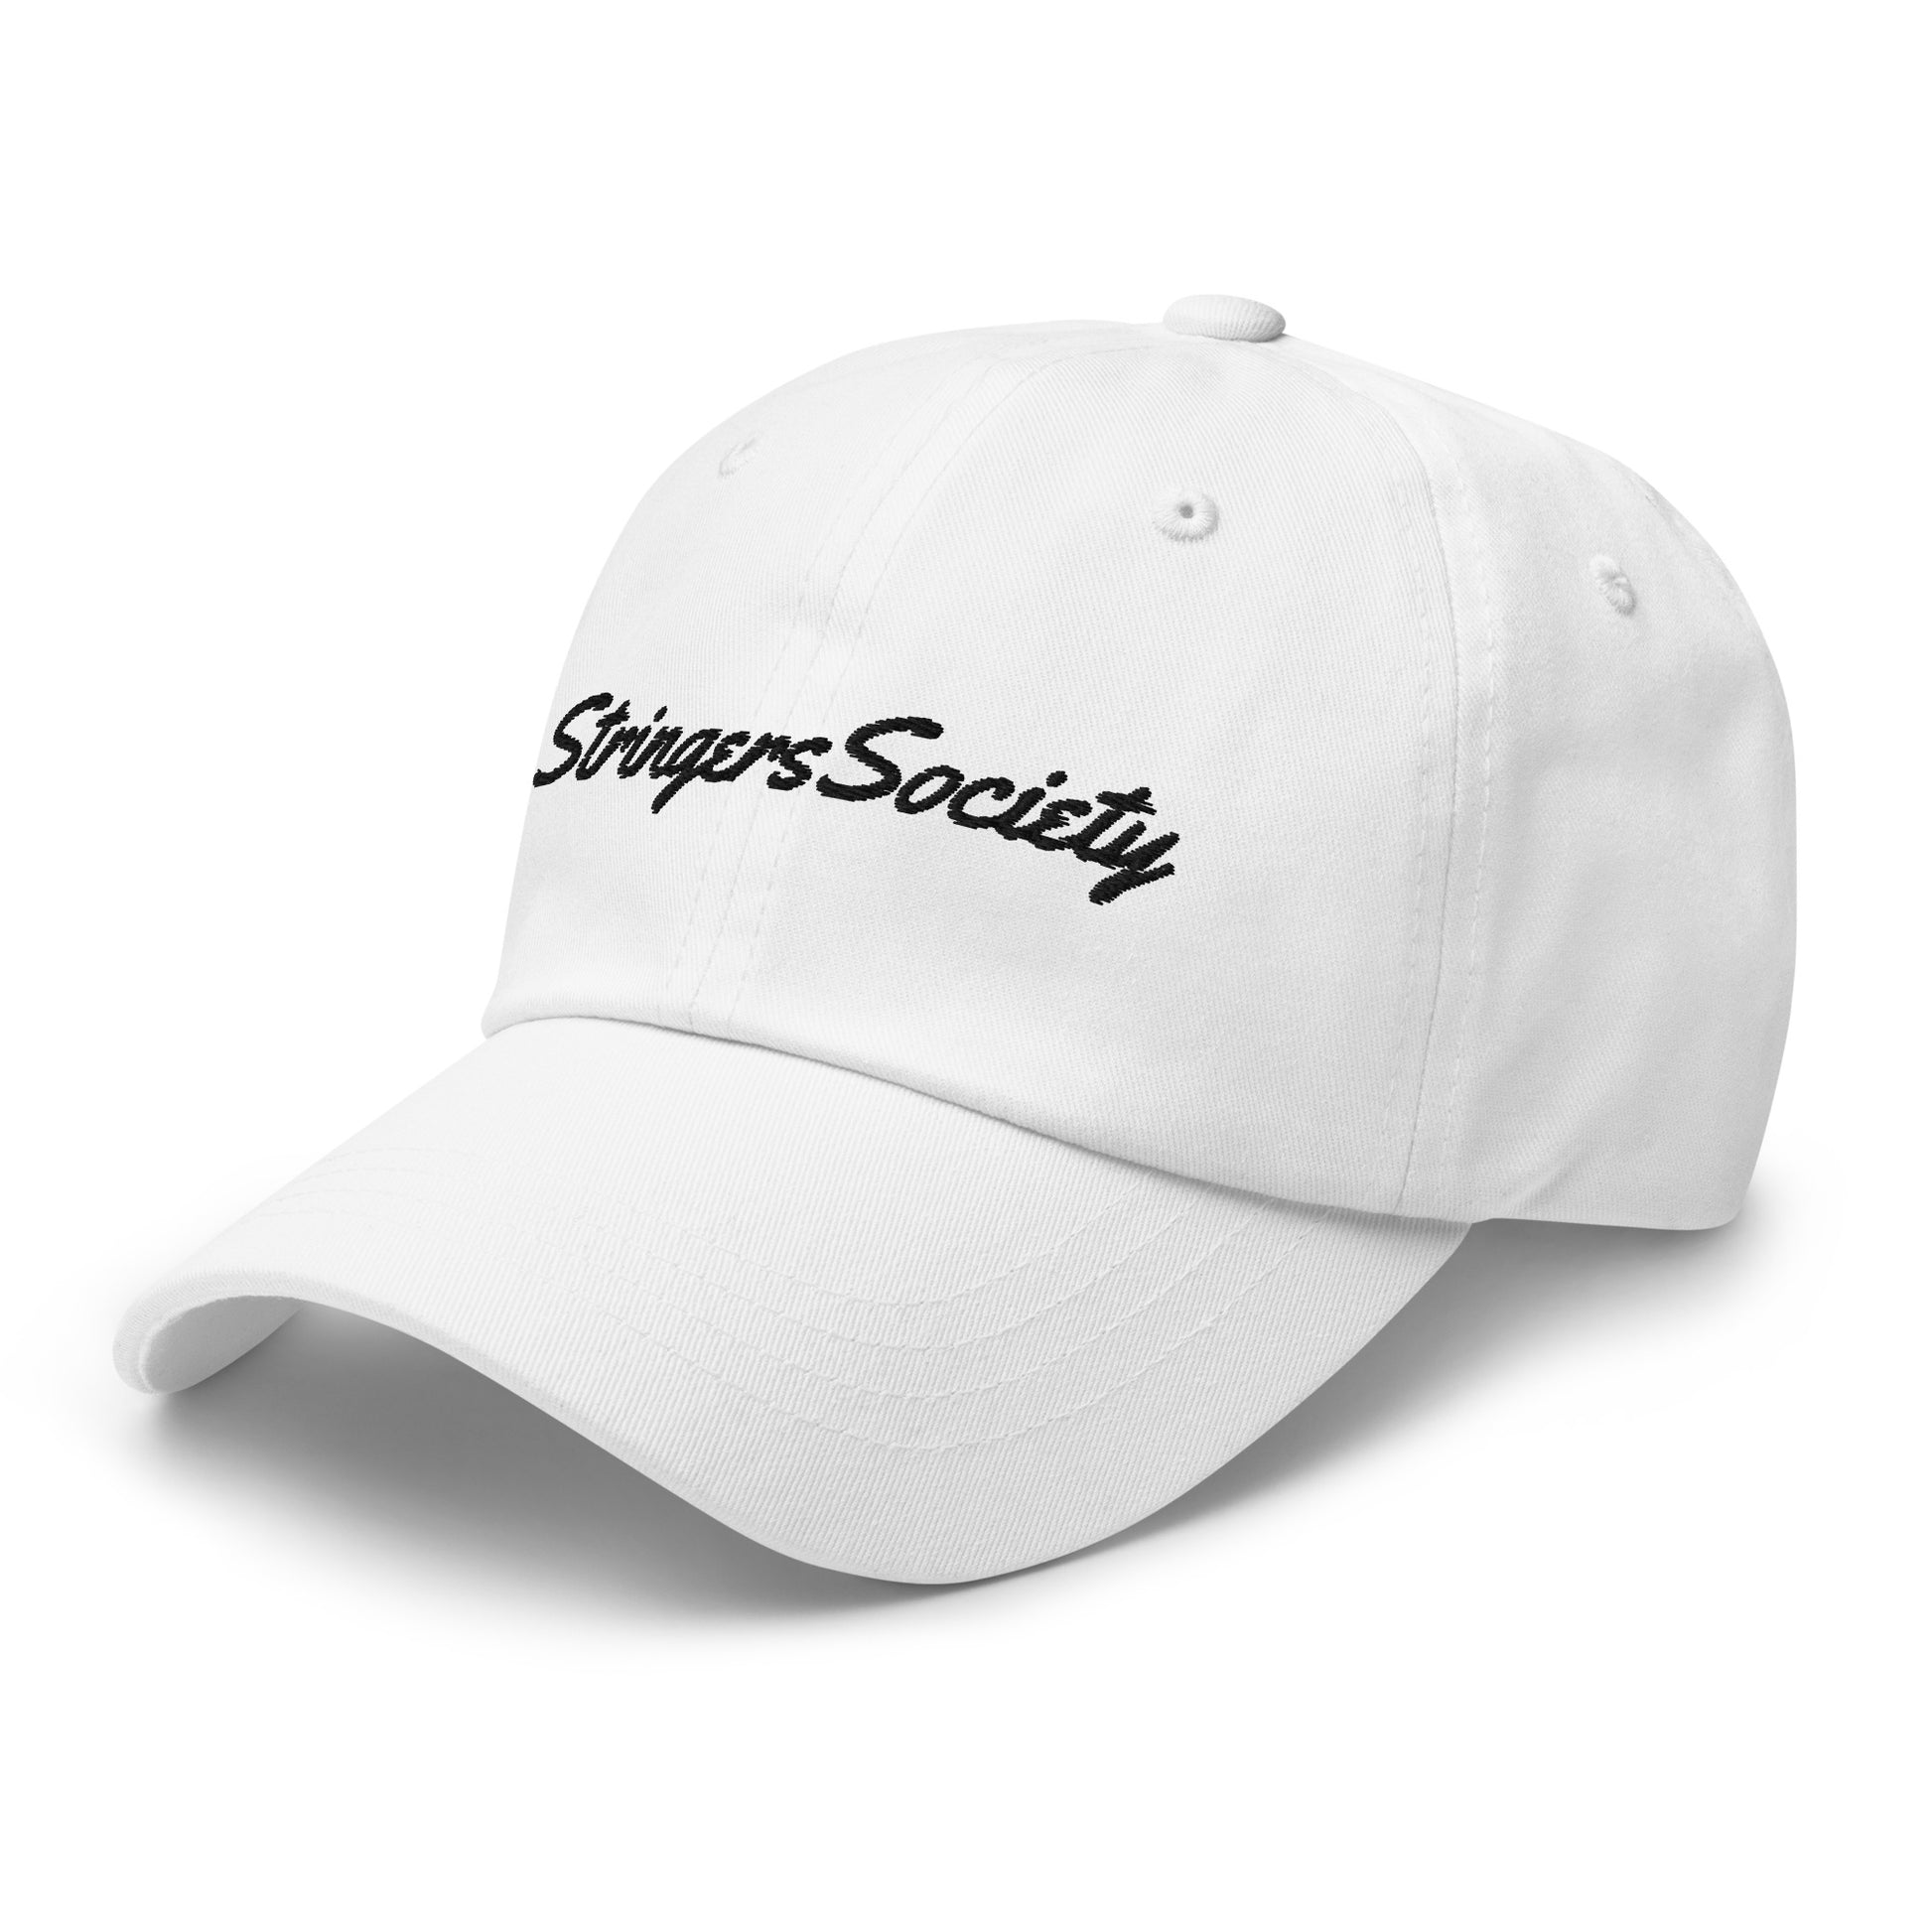 Embroidered Stringers Society Lacrosse Hat